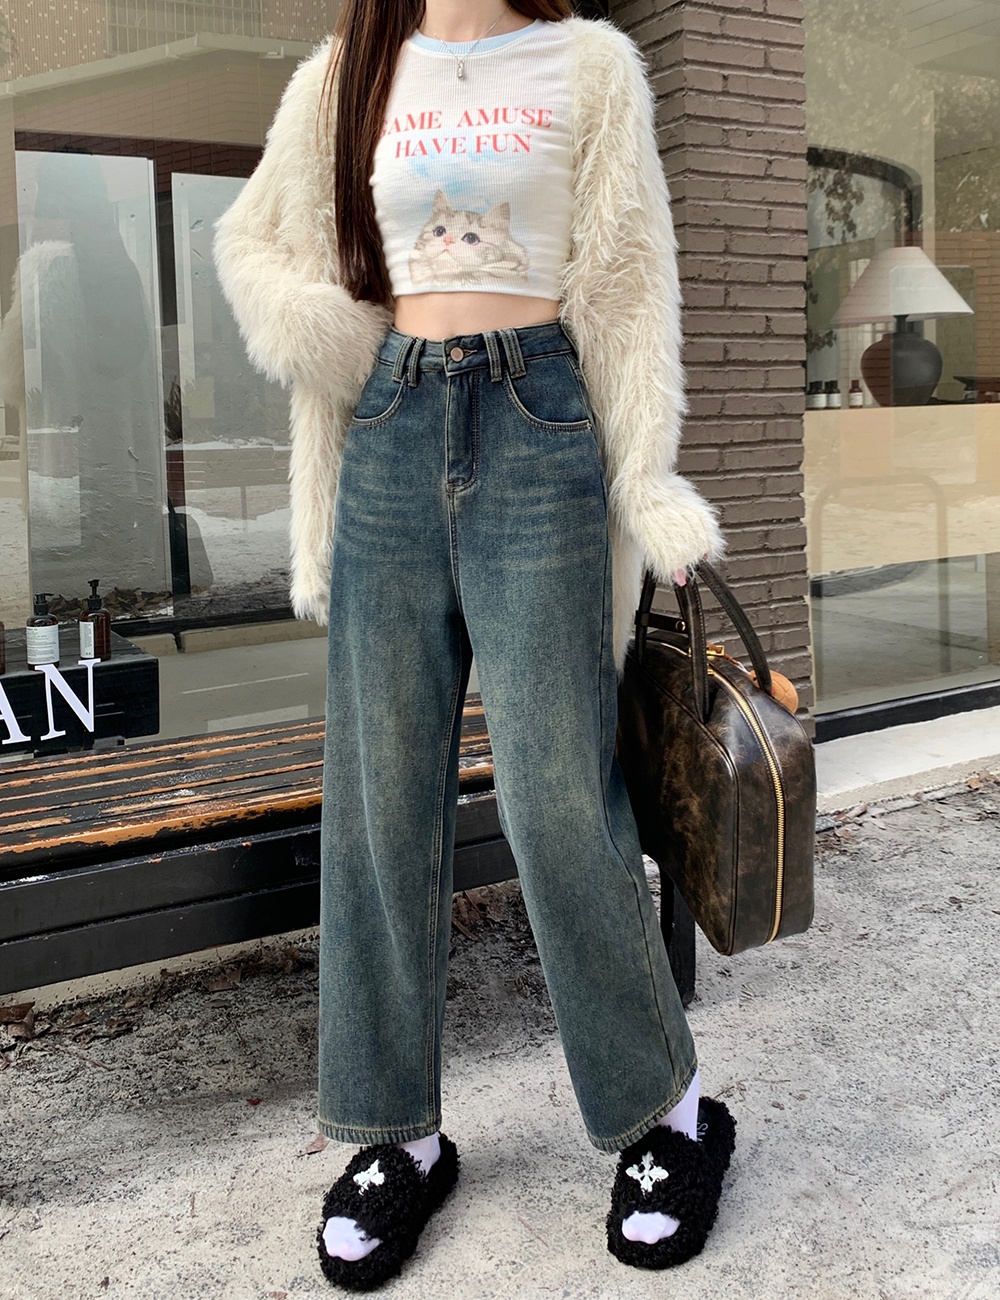 Thermal straight jeans winter thick pants for women